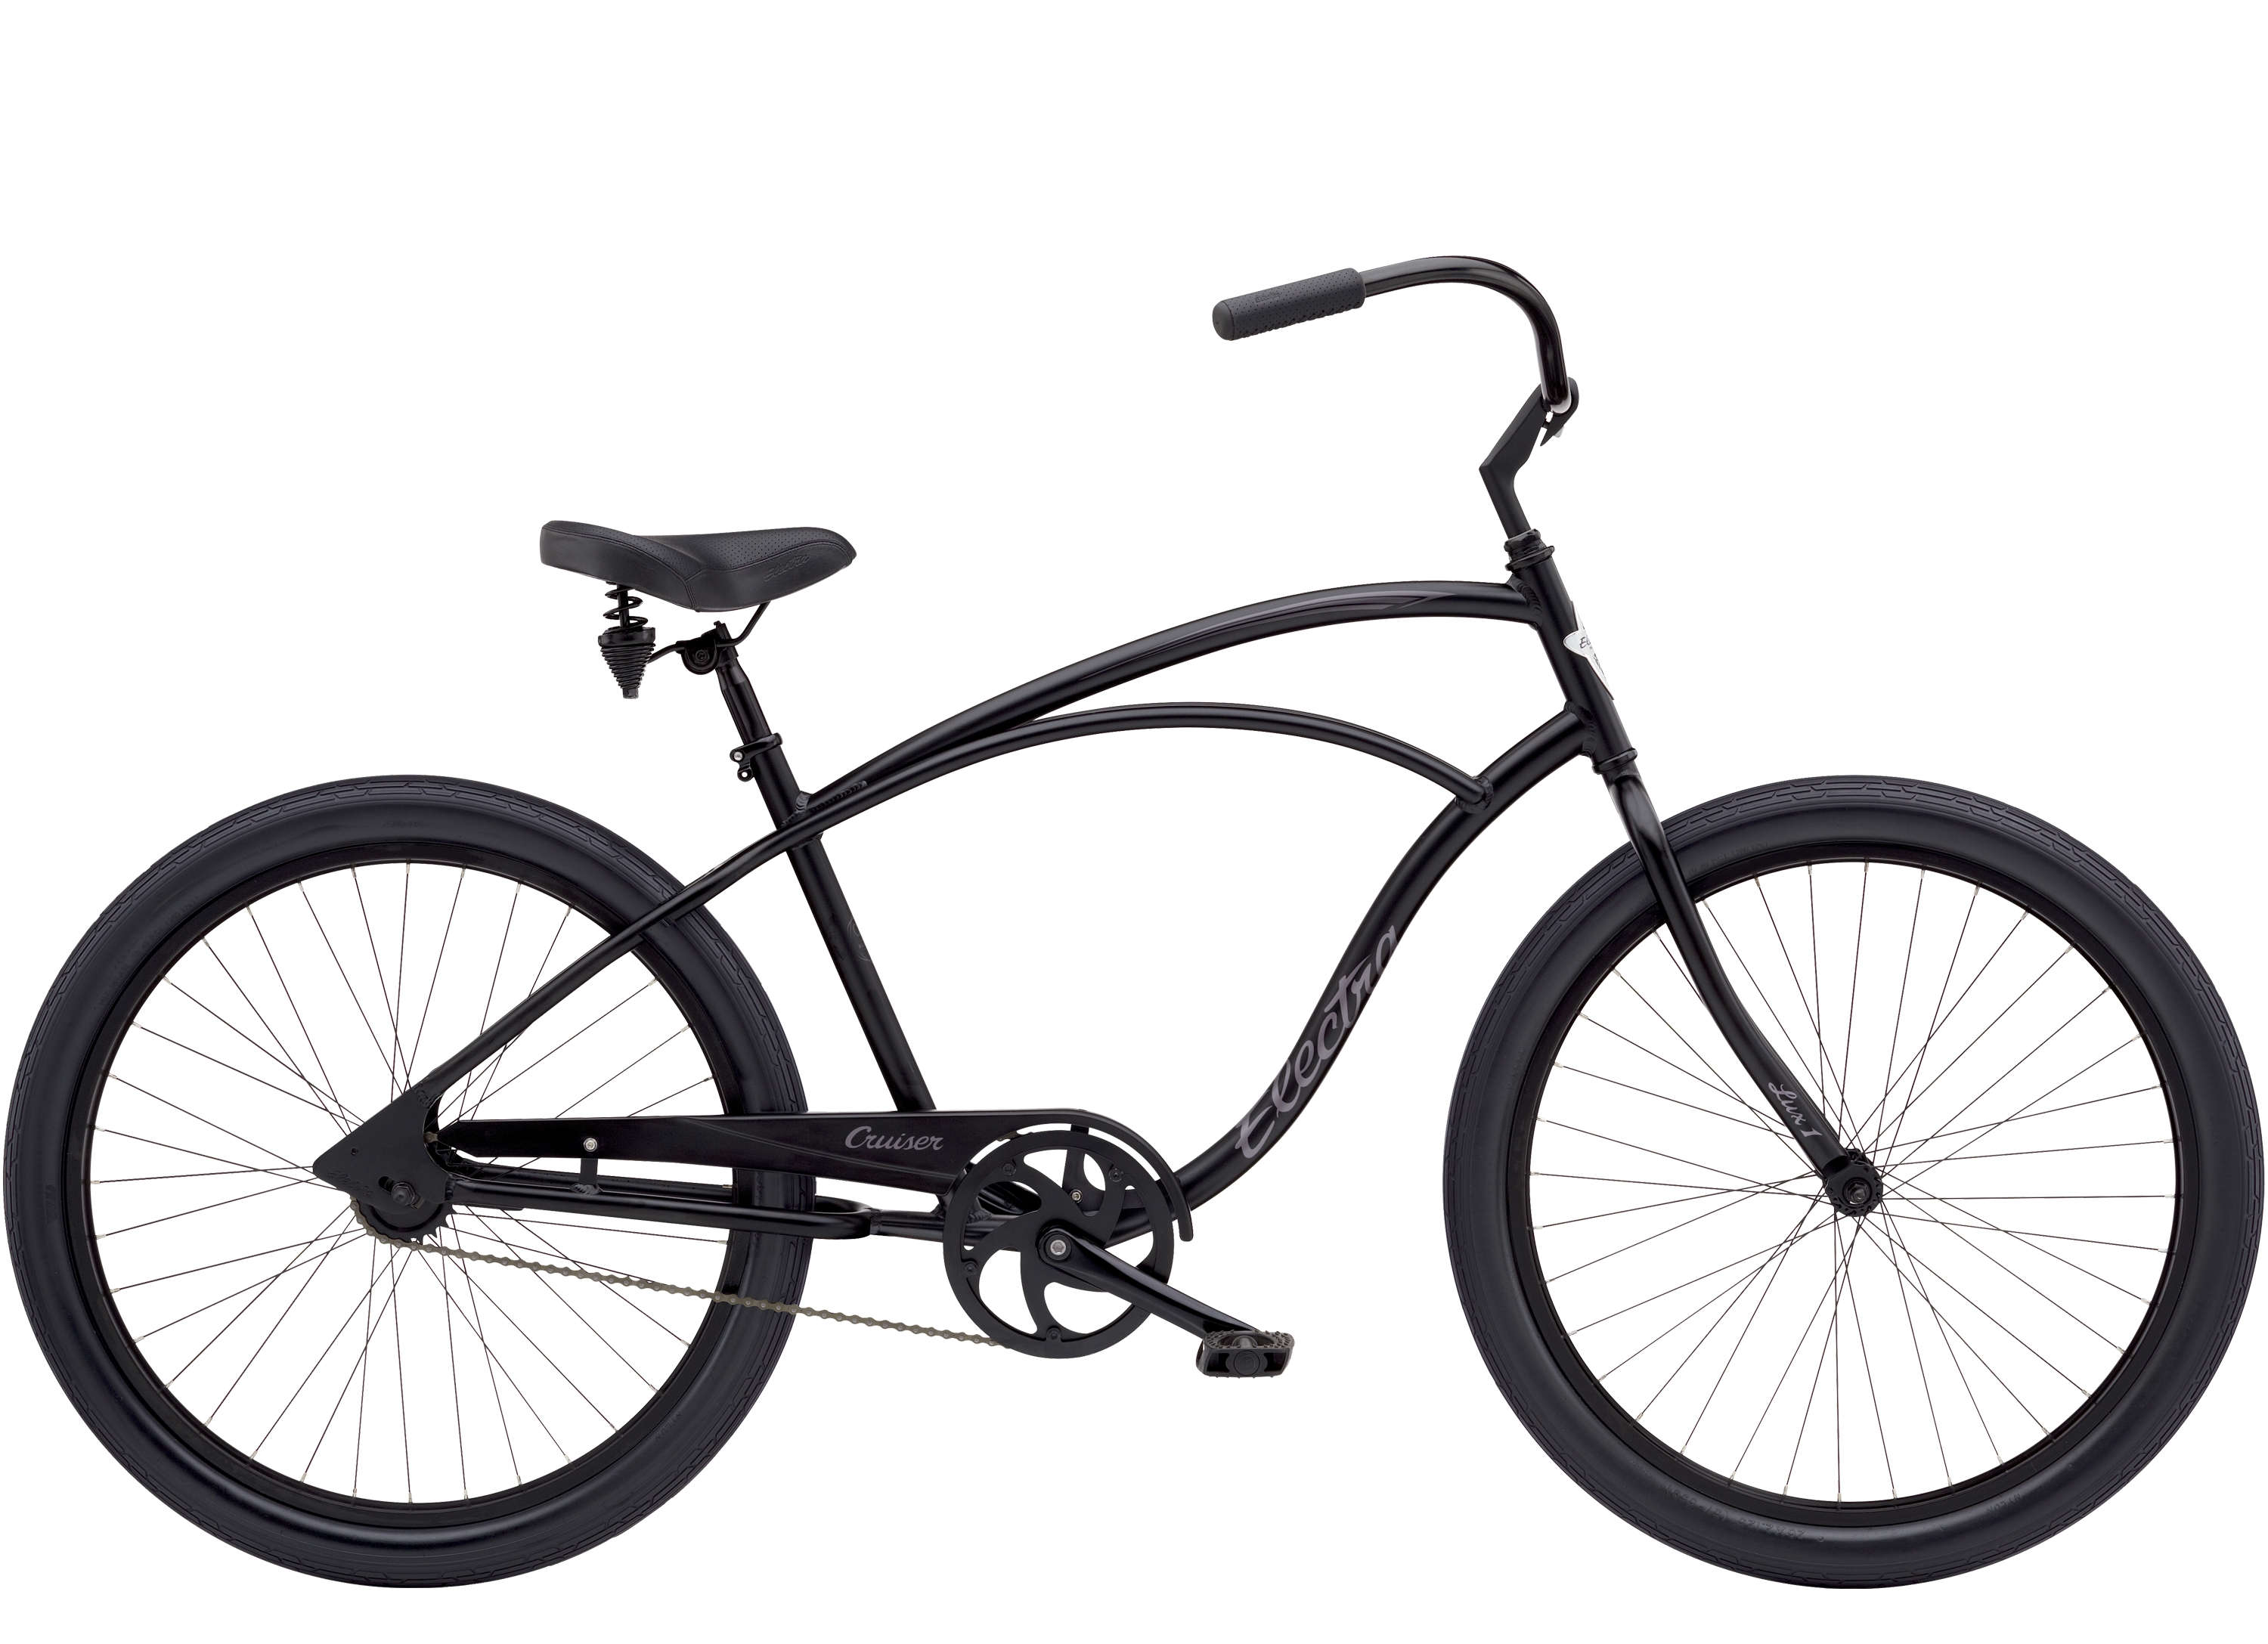 cruiser style bicycle